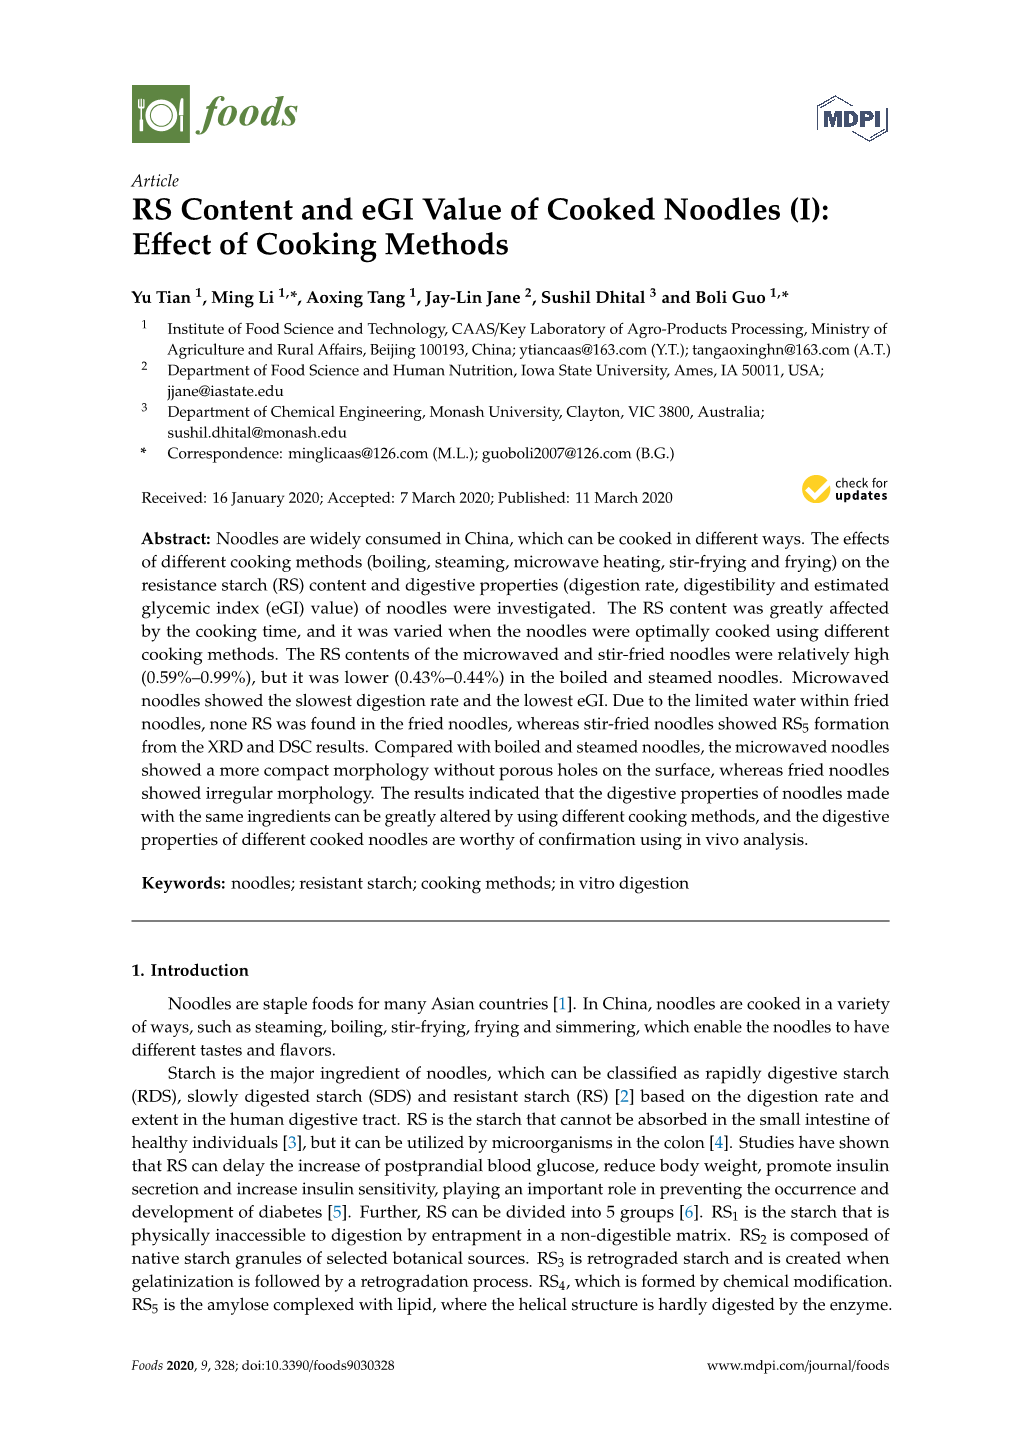 RS Content and Egi Value of Cooked Noodles (I): Effect of Cooking